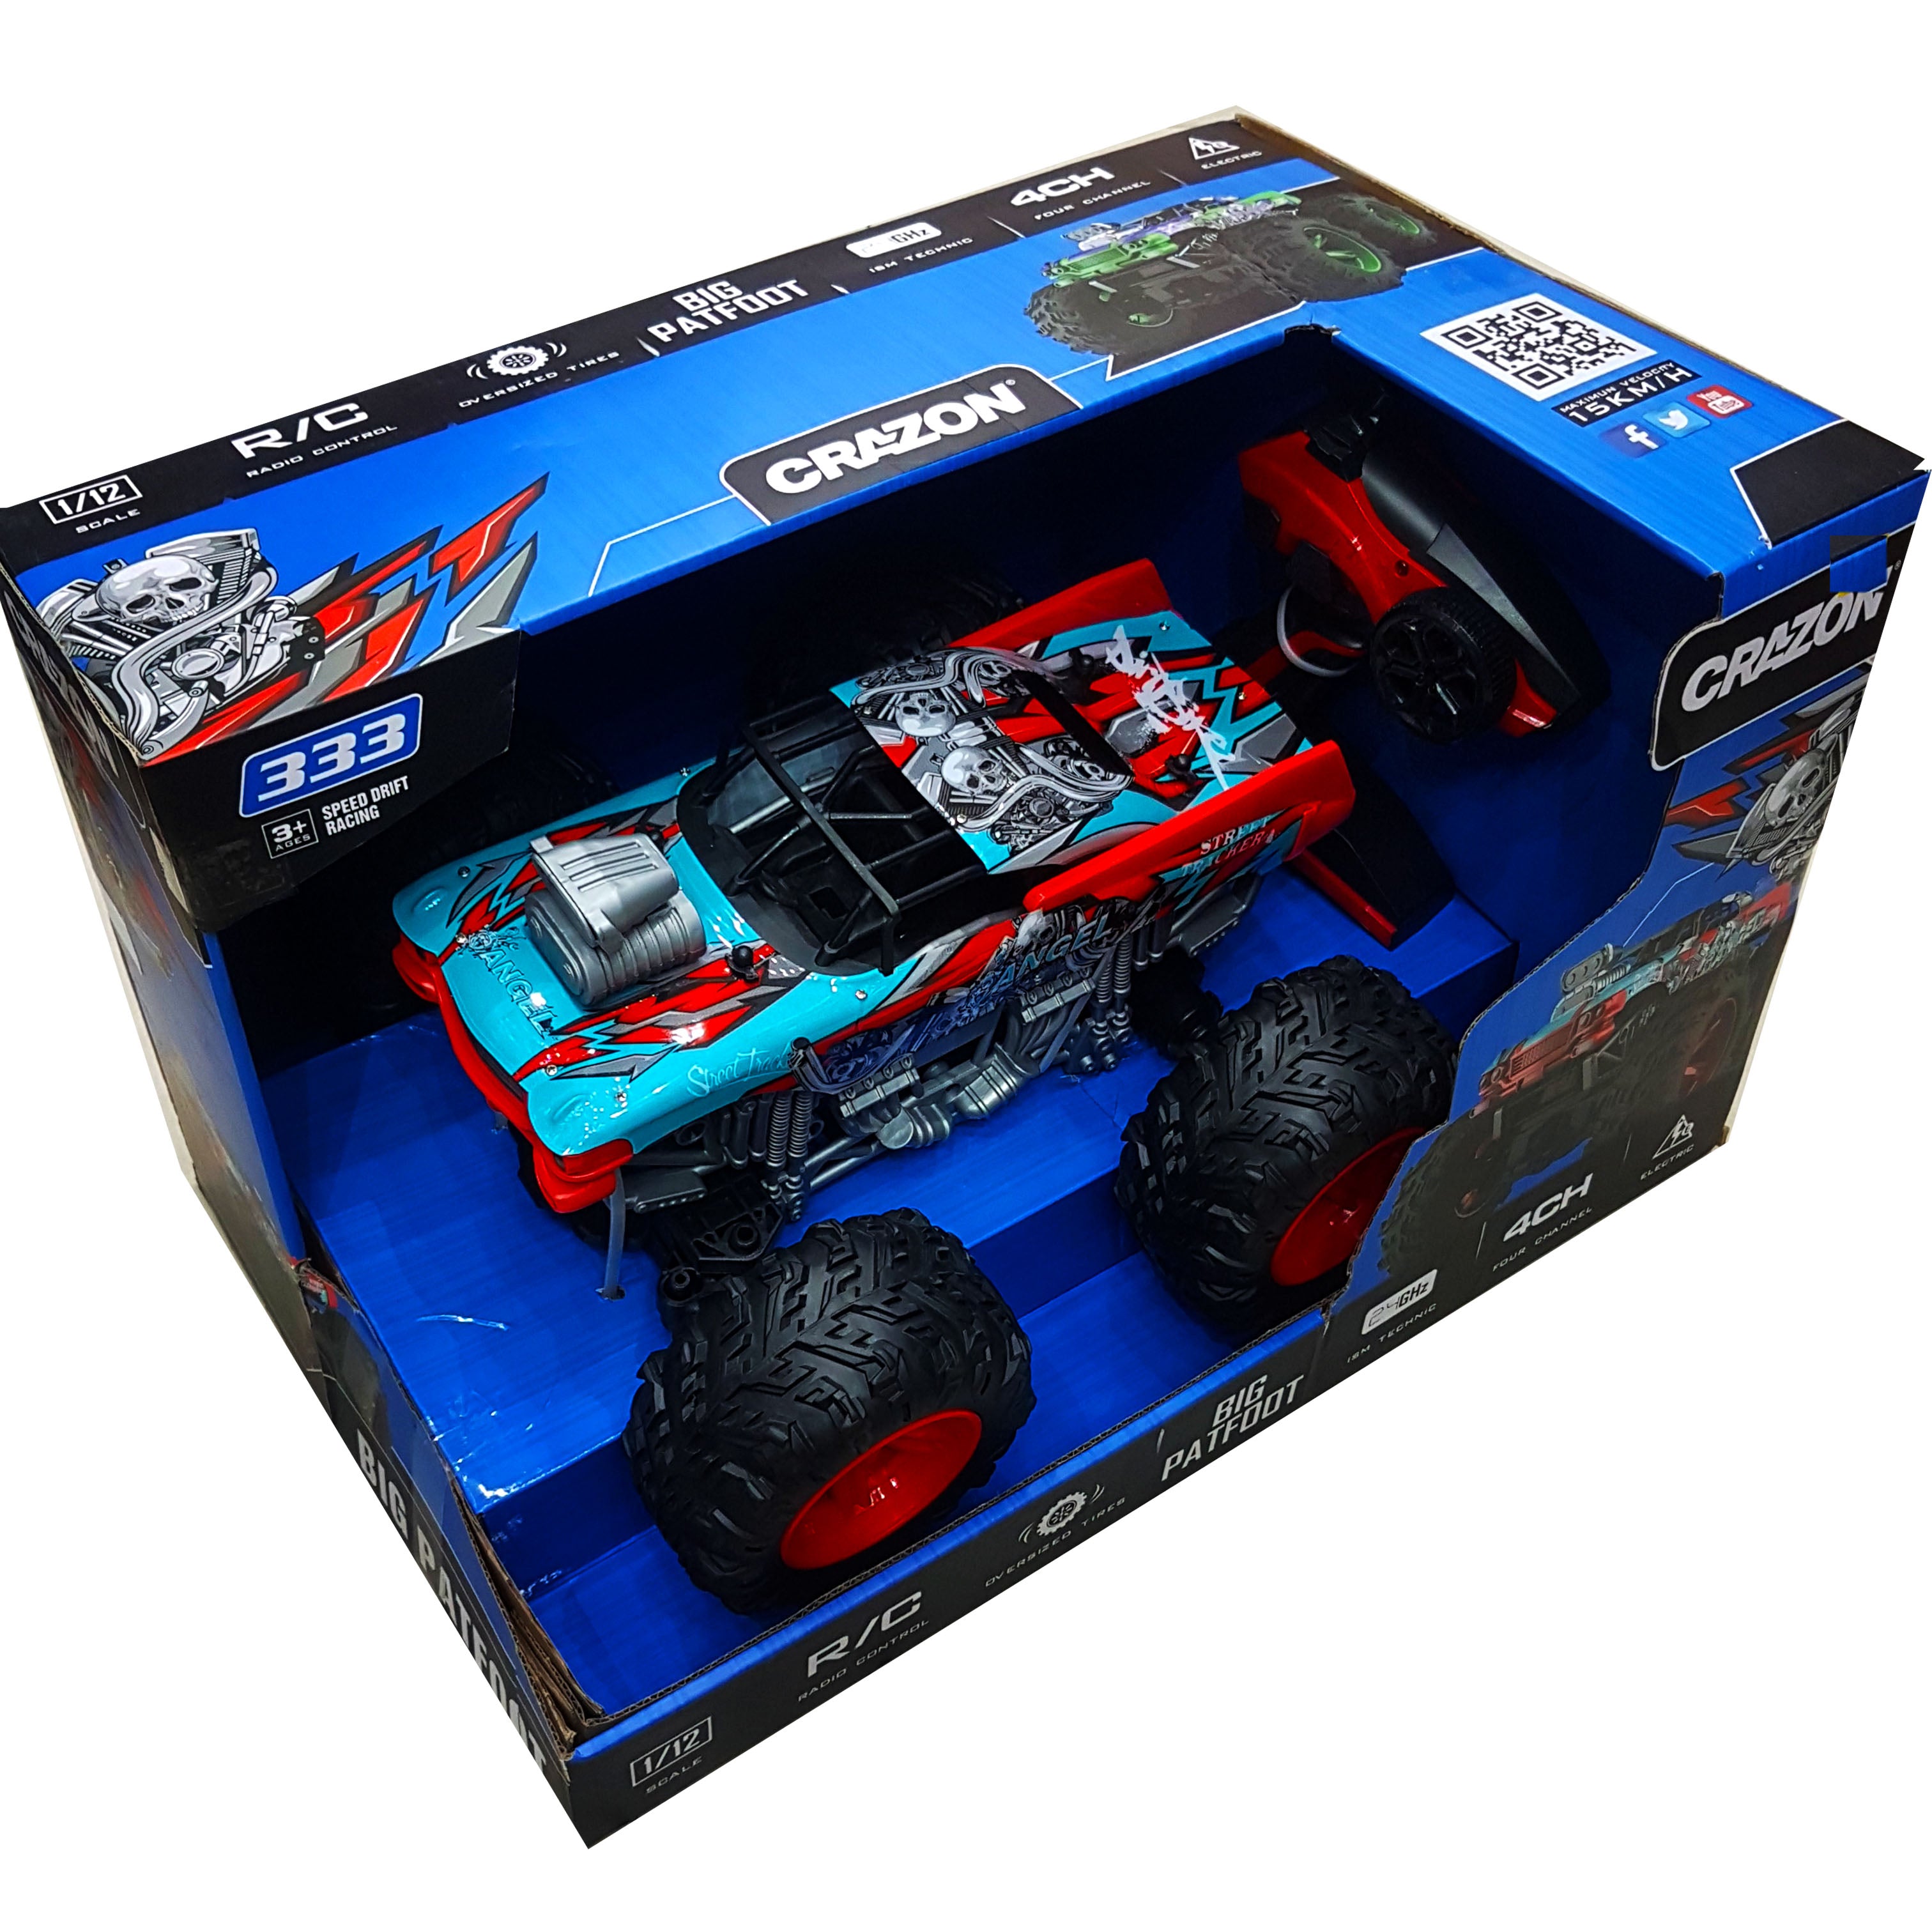 CRAZON 1/12 Scale Remote Control Car with Oversized Tires, 2.4GHz 4 Channel, 15km/h Max Speed, Drift Racing, Big Patfoot - New Arrival Toy for Boys